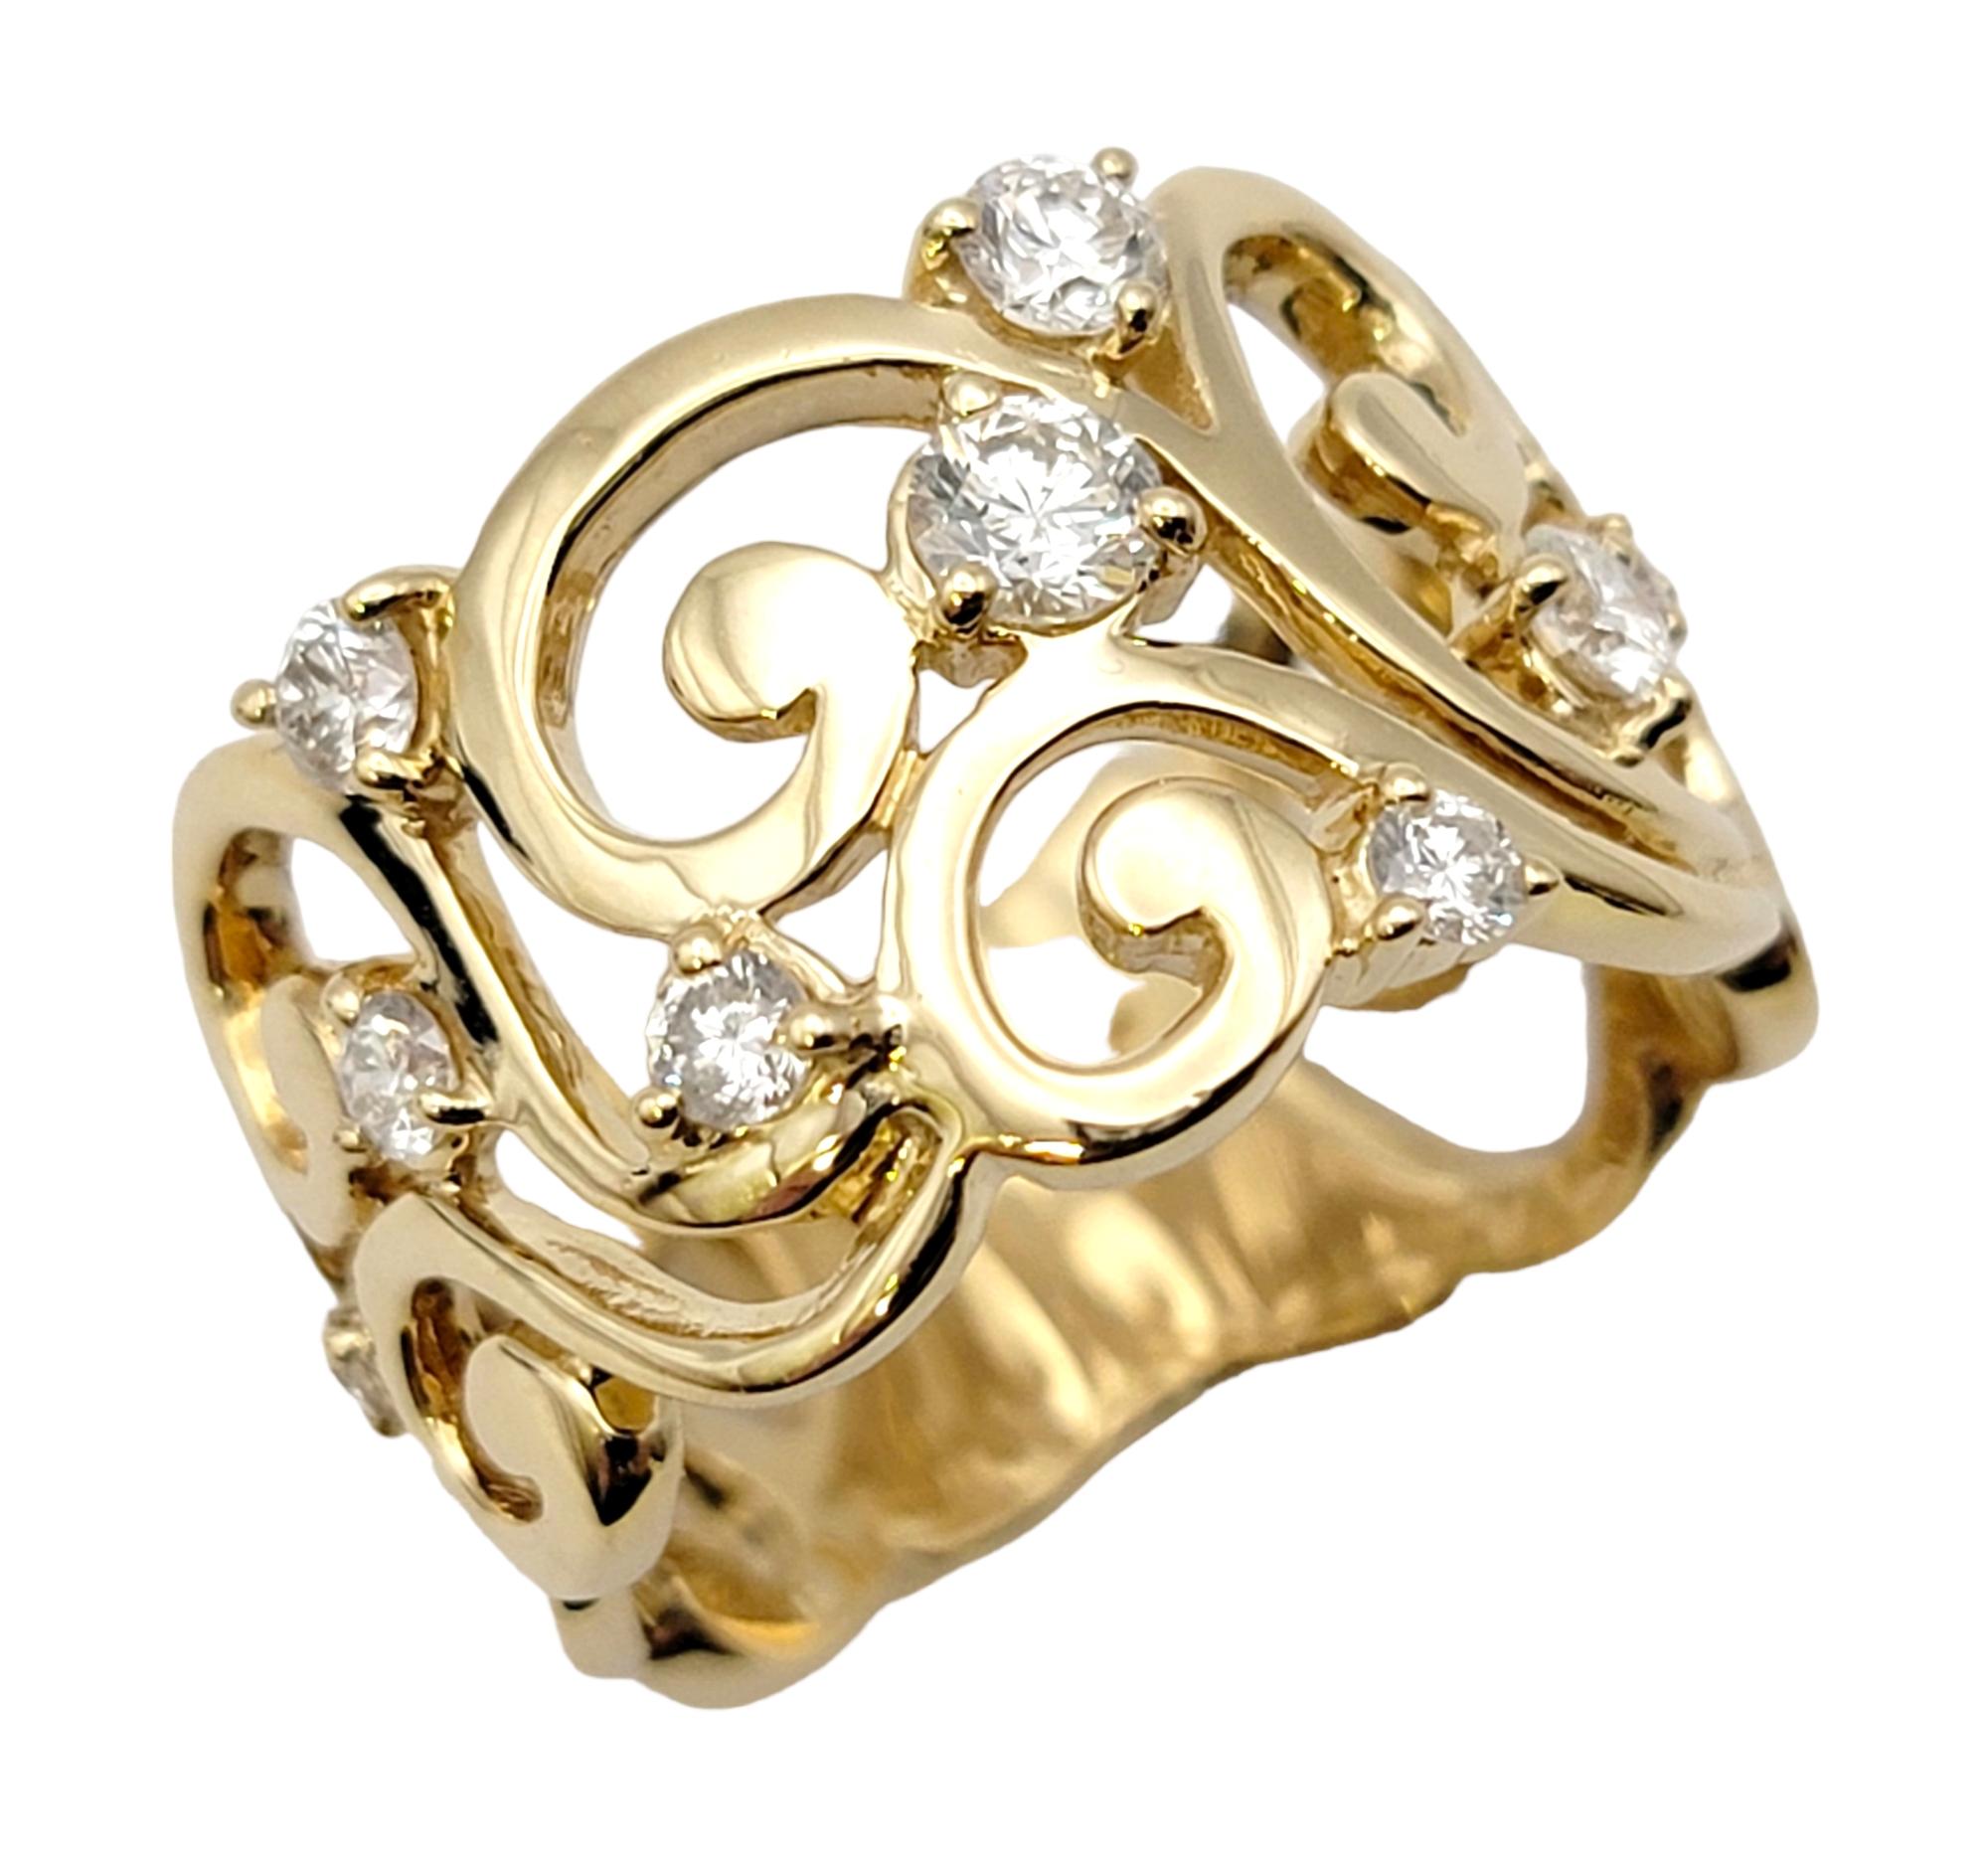 Ring size: 6.75

We simply adore how this swirling, sparkling band ring looks on the finger. The sparkling diamonds shine against the warm yellow gold setting while the open scroll motif gives added interest and design.  

The elegant band ring with